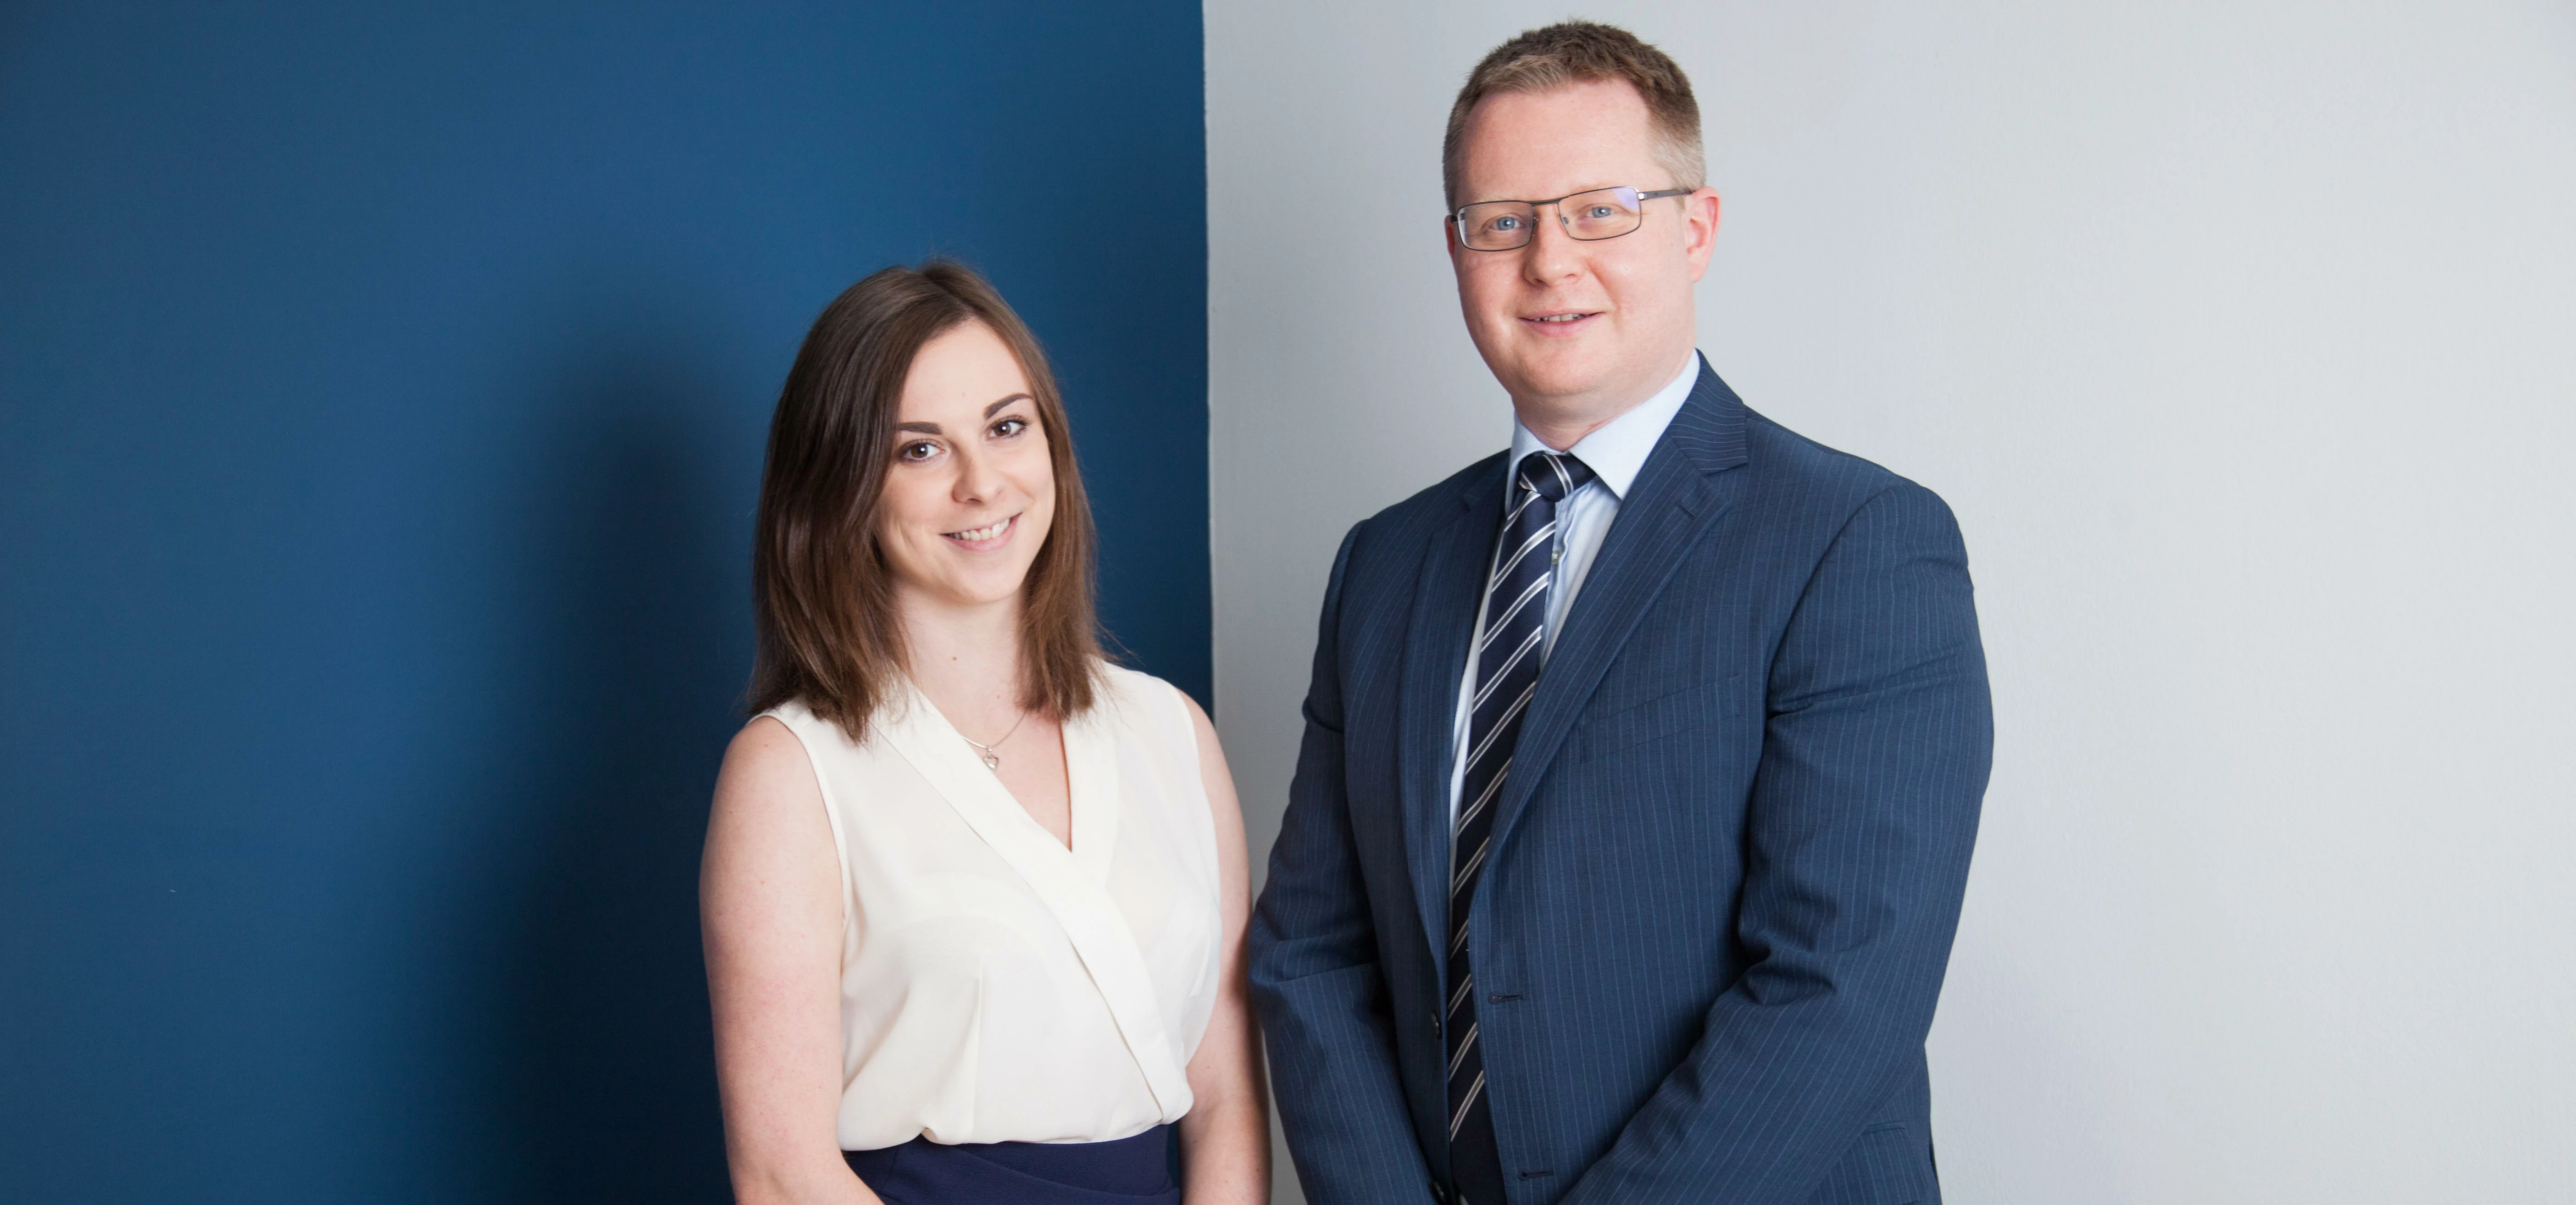 Graduate Laura Head and North East planner Richard Newsome from Story Homes